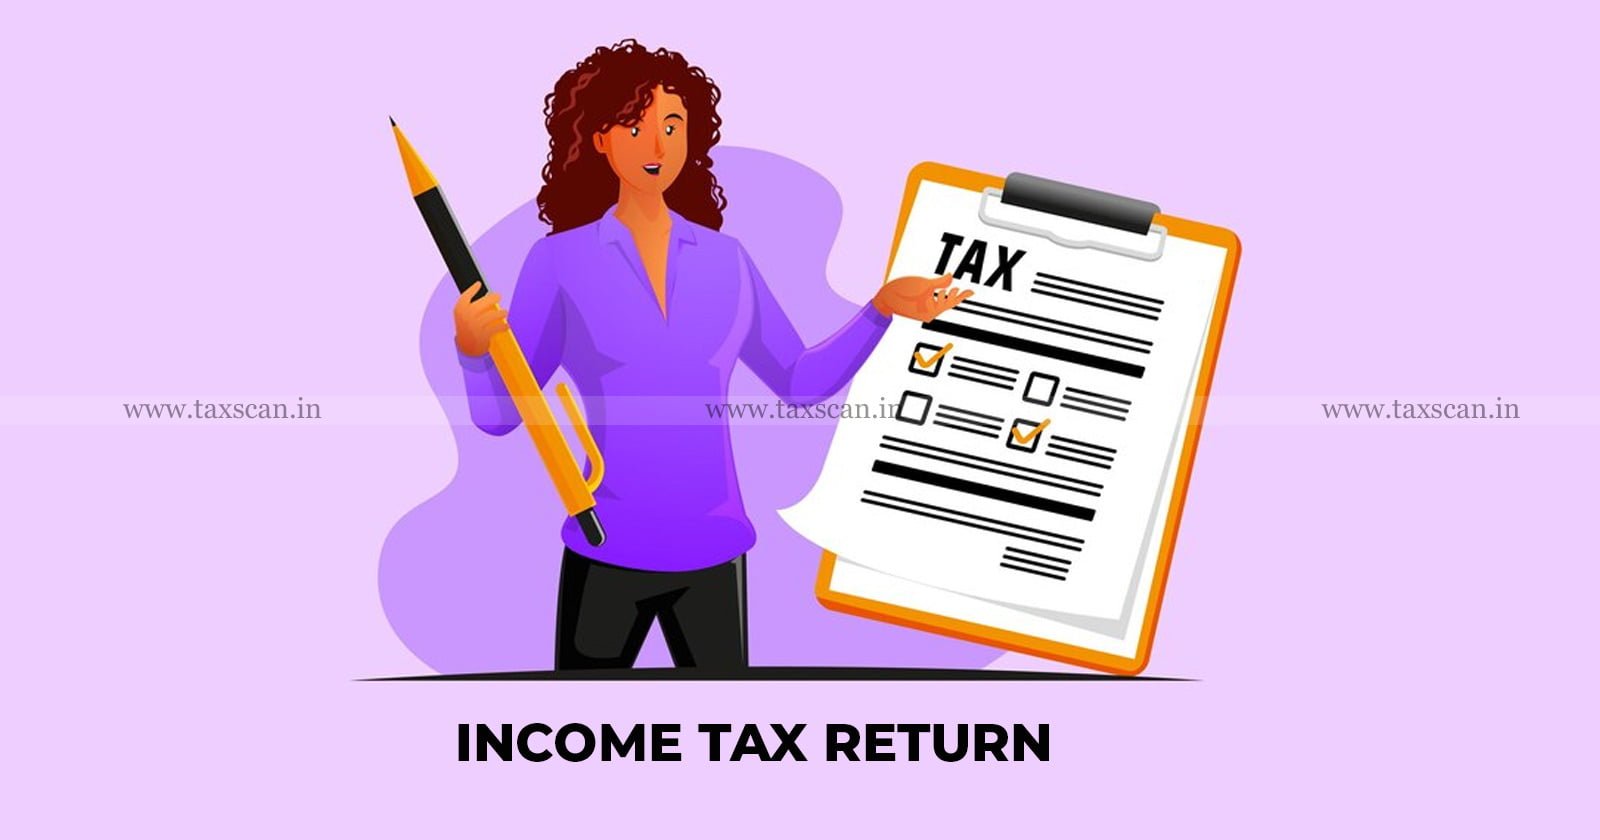 Central Govt - notices - Non-Filing of Returns - Filing of Returns - Underreported and Misrepresented Income - Misrepresented Income - Underreported - taxscan